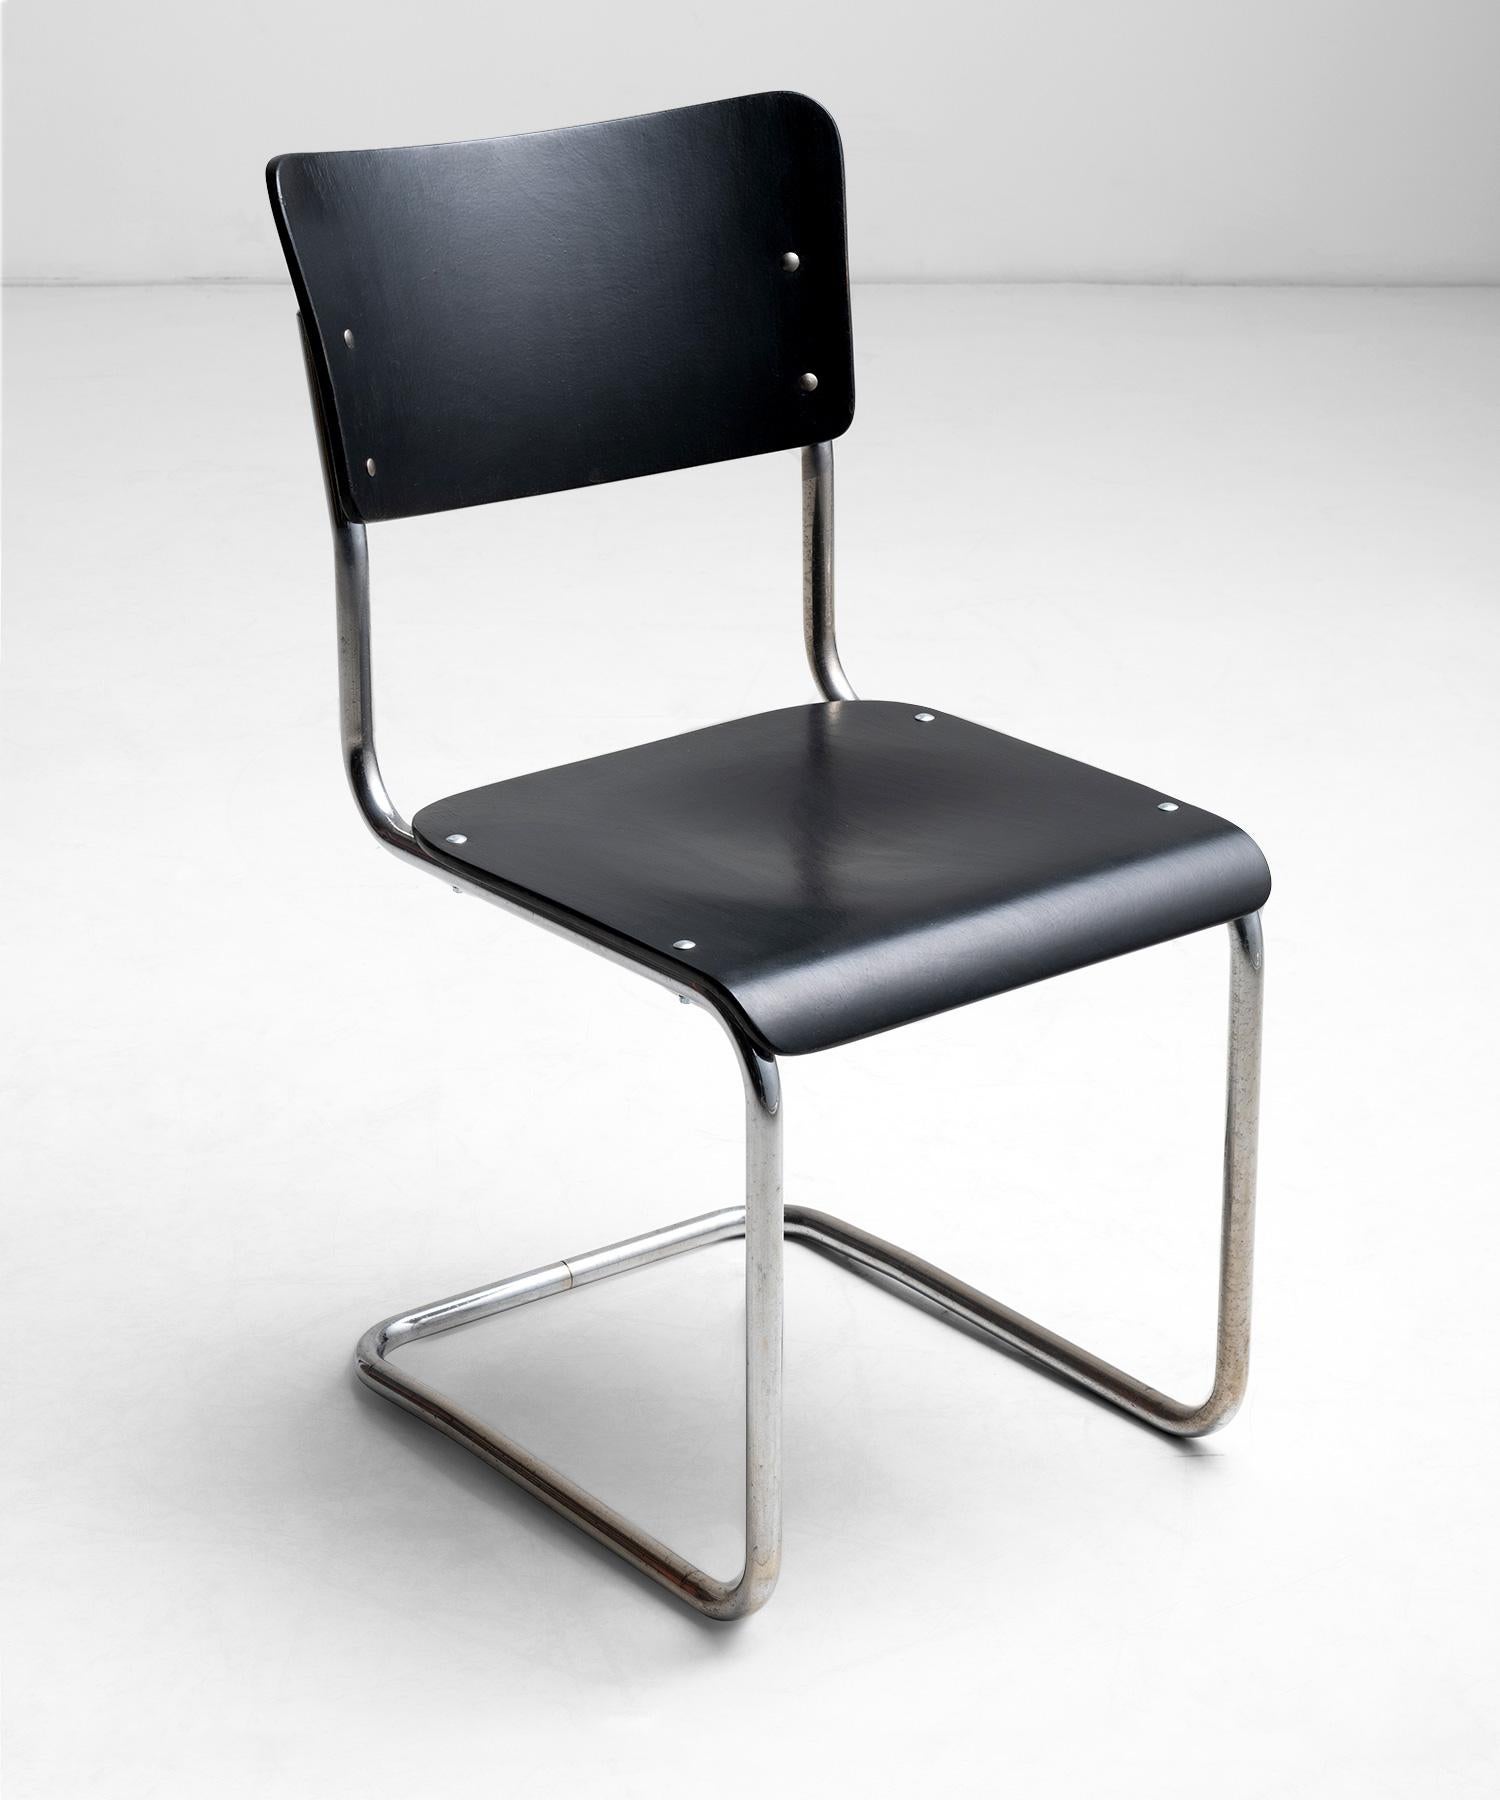 20th Century Mauser Cantilever Chairs, Germany Circa 1920 For Sale